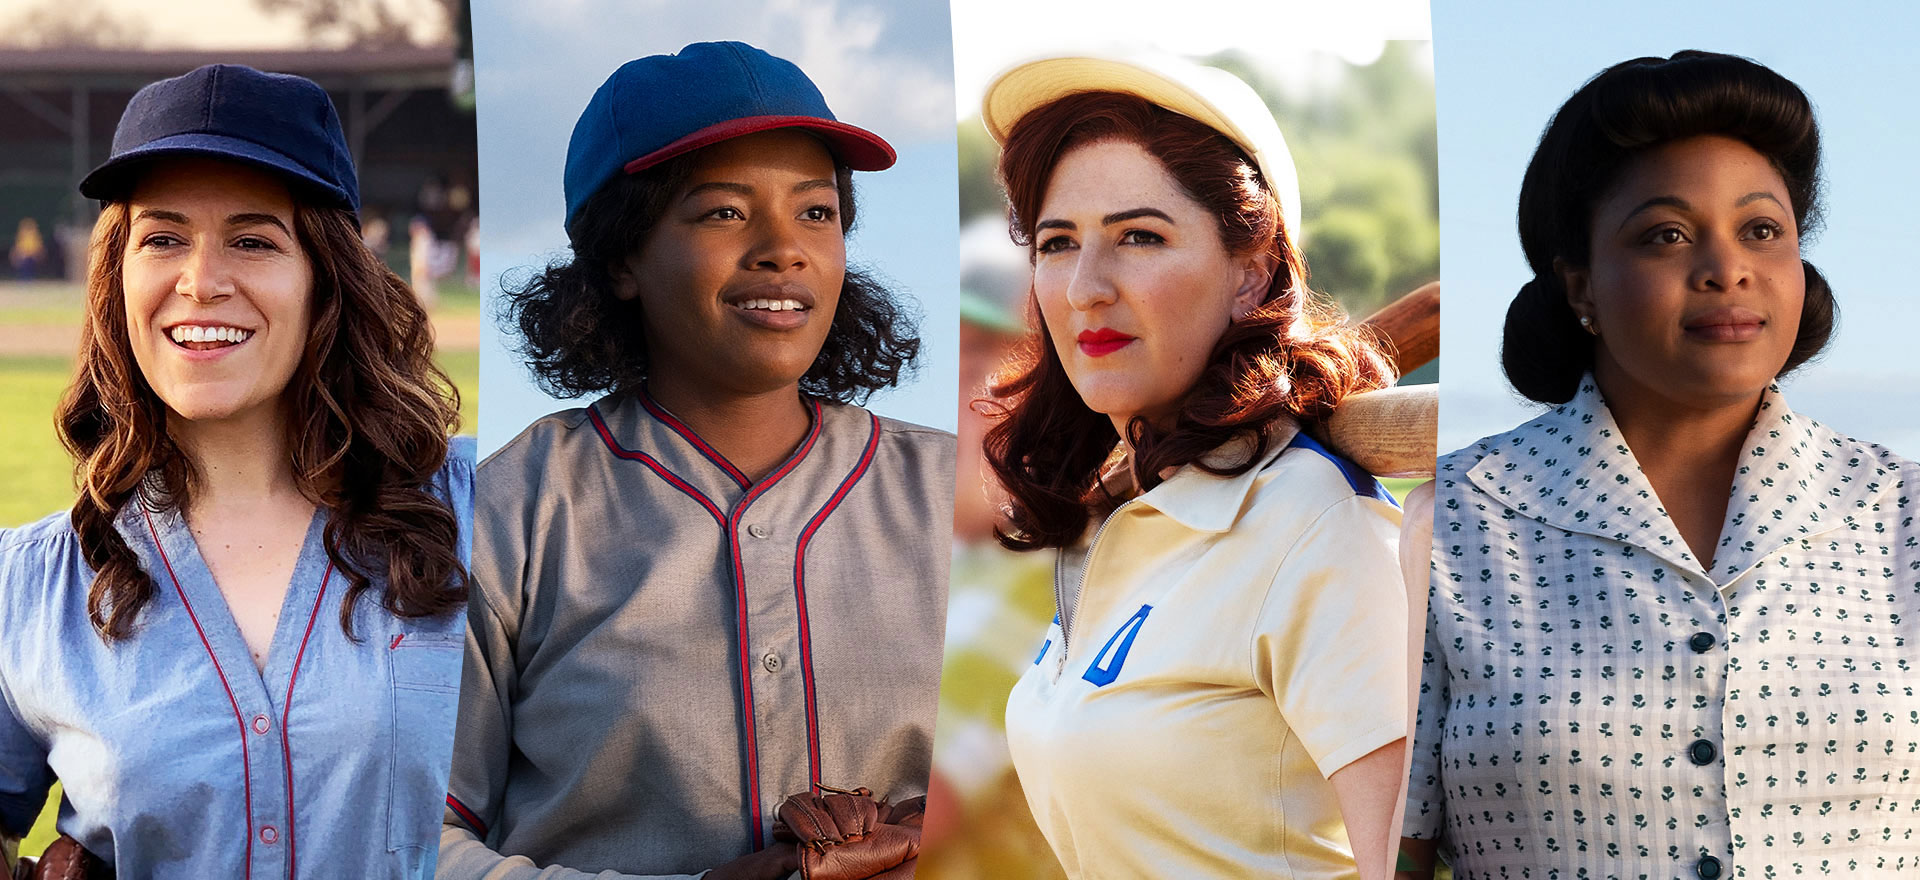 Amazon Has Ordered an ‘A League of Their Own’ Reboot Television Series